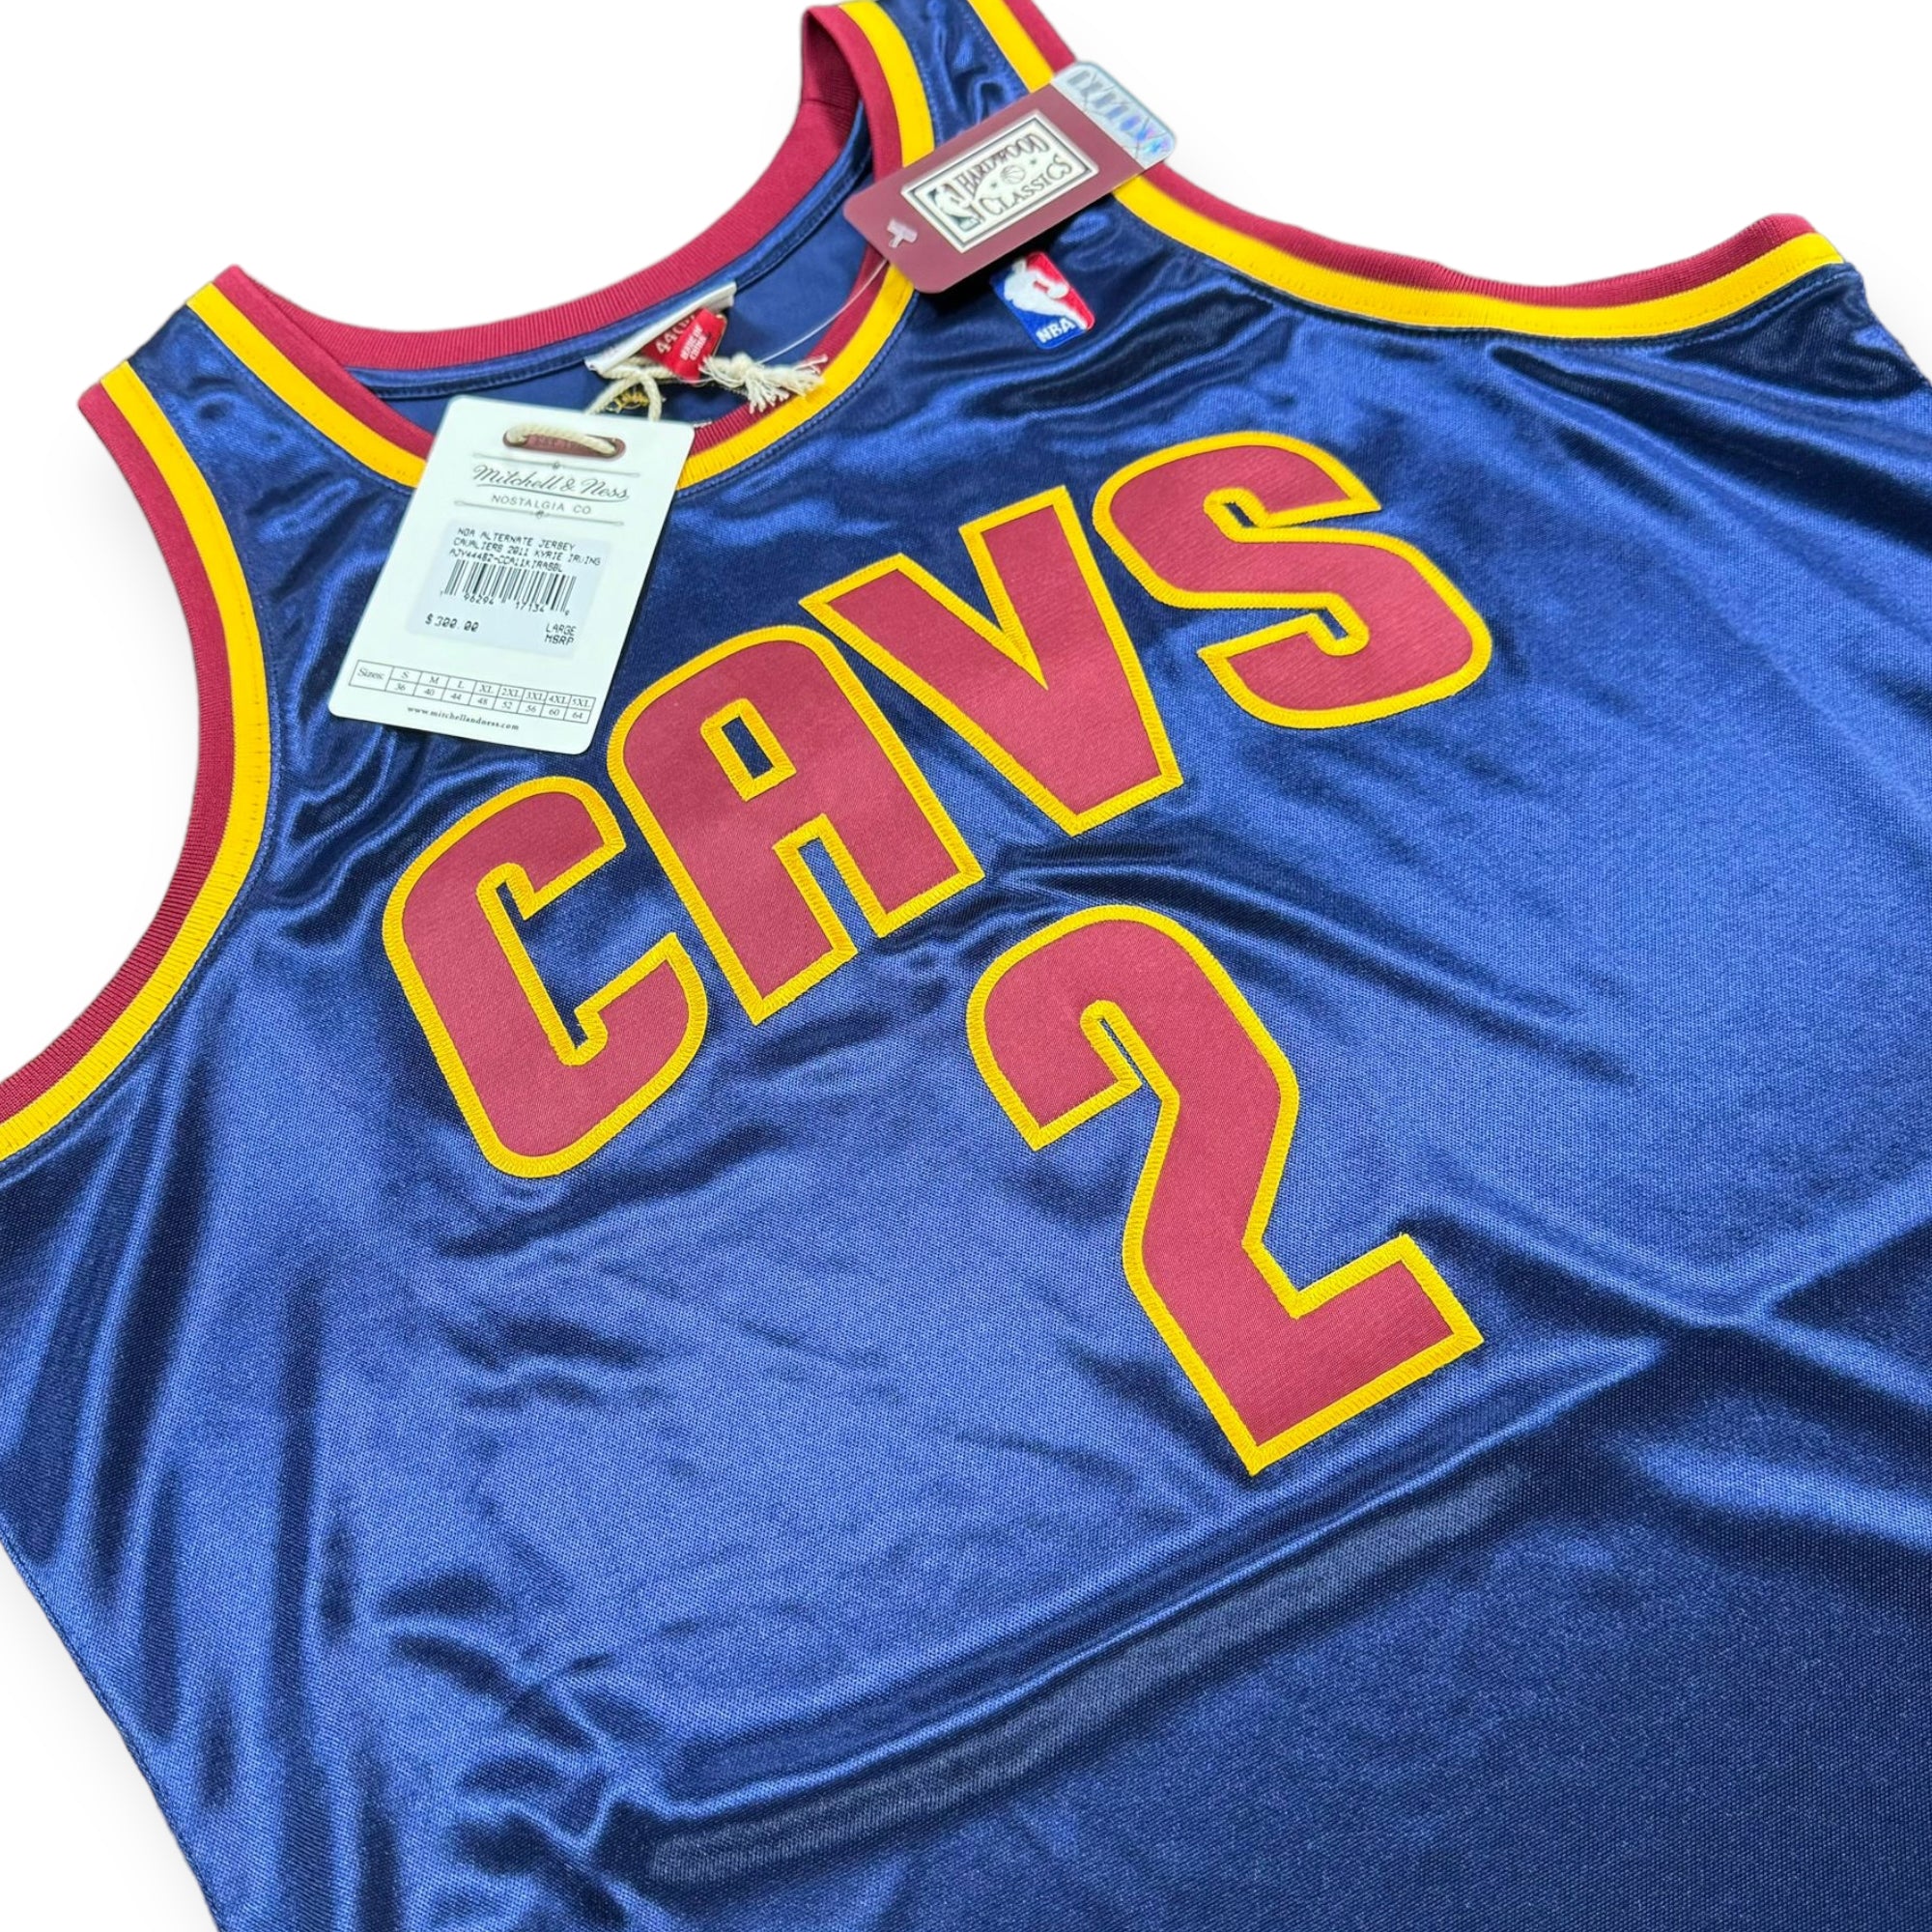 Mitchell&Ness Kyrie Irving Cleveland Cavaliers 2011-2012 Hardwood Classic Authentic Jersey -Navy